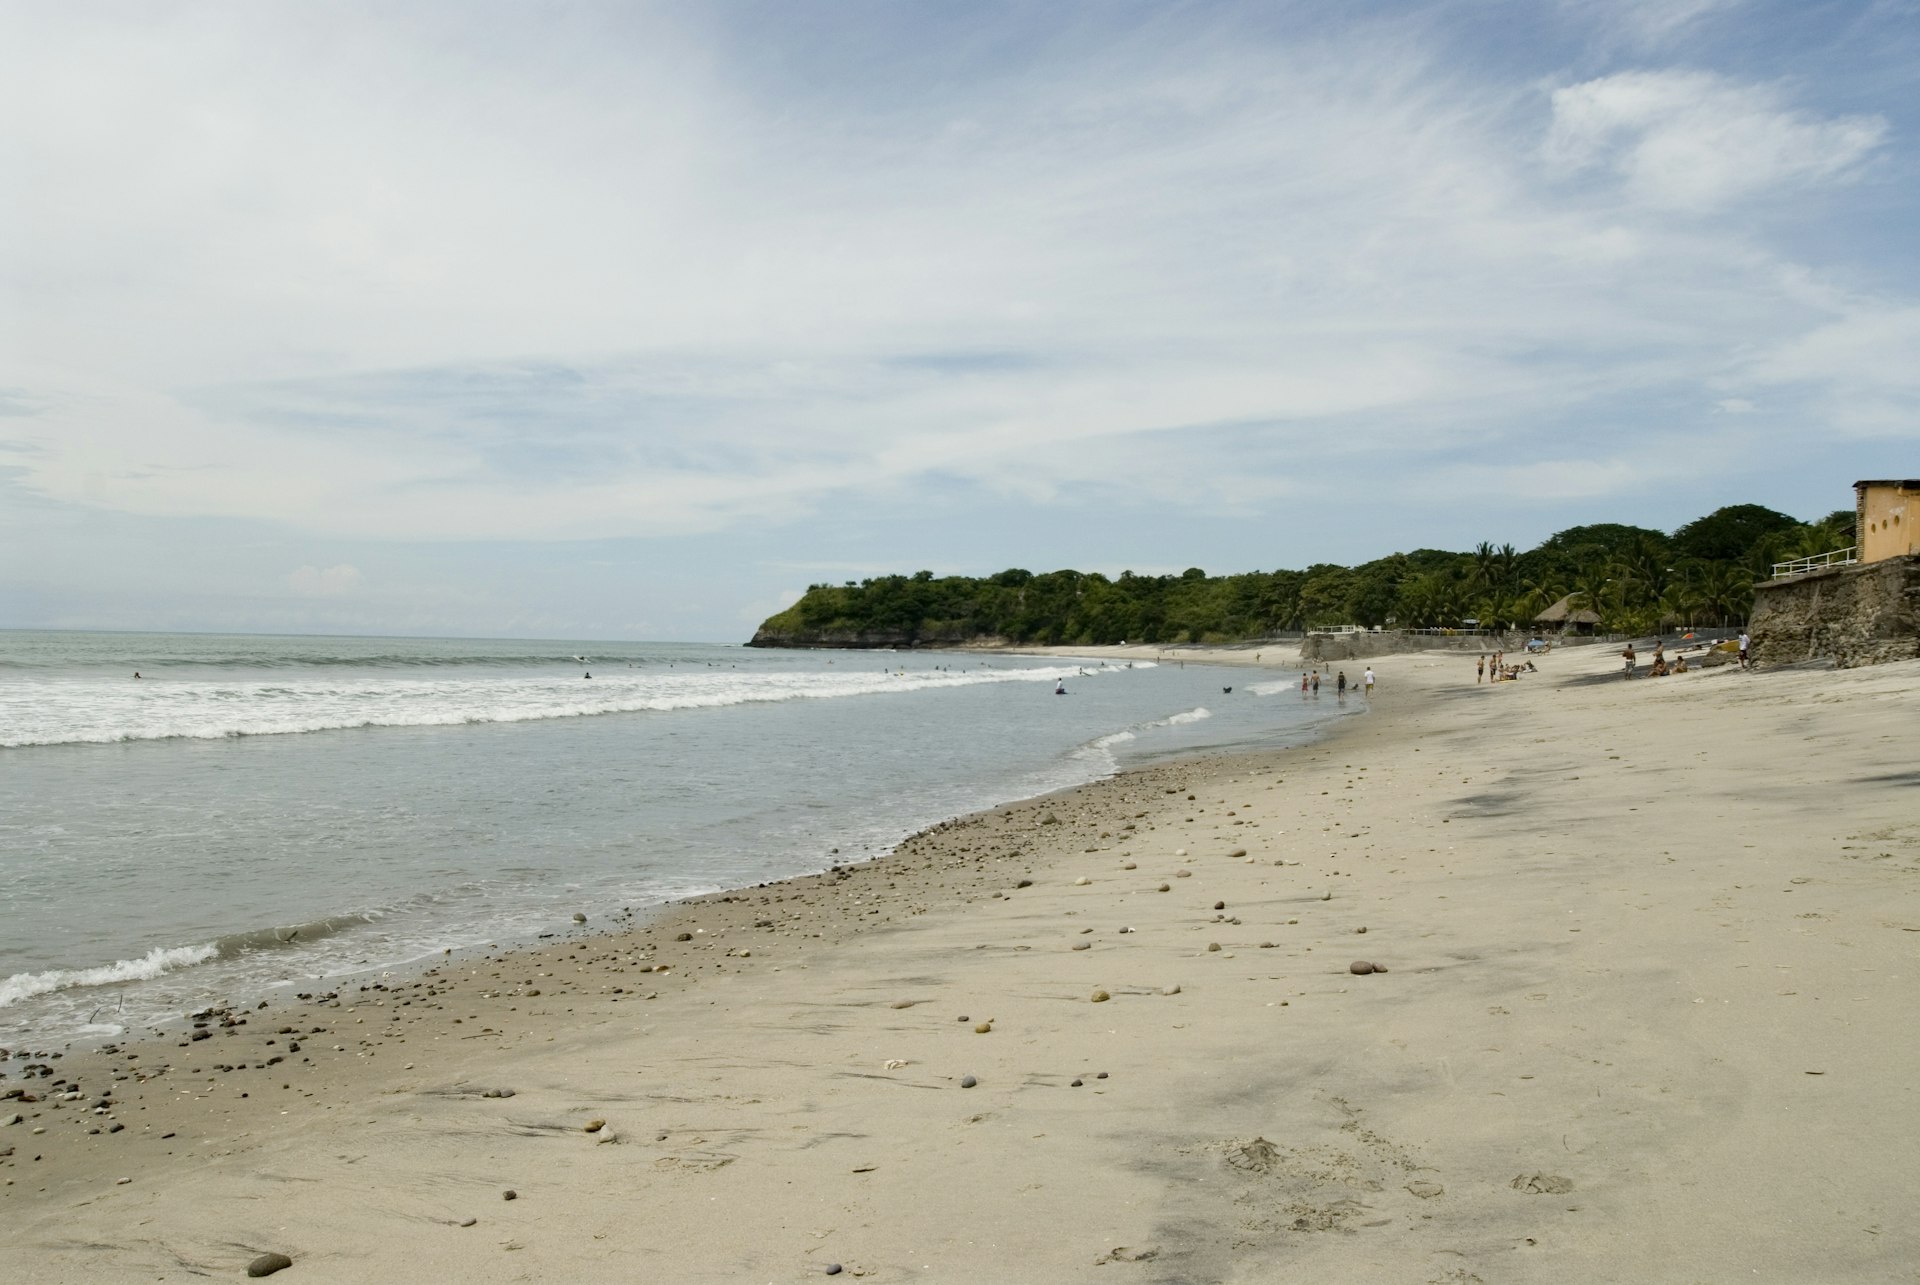 A wide angled view of El Palmar Beach in Panama. The beach is sandy and gently slopes down into a gentle sea. A few families stand around on the sand in the distance.